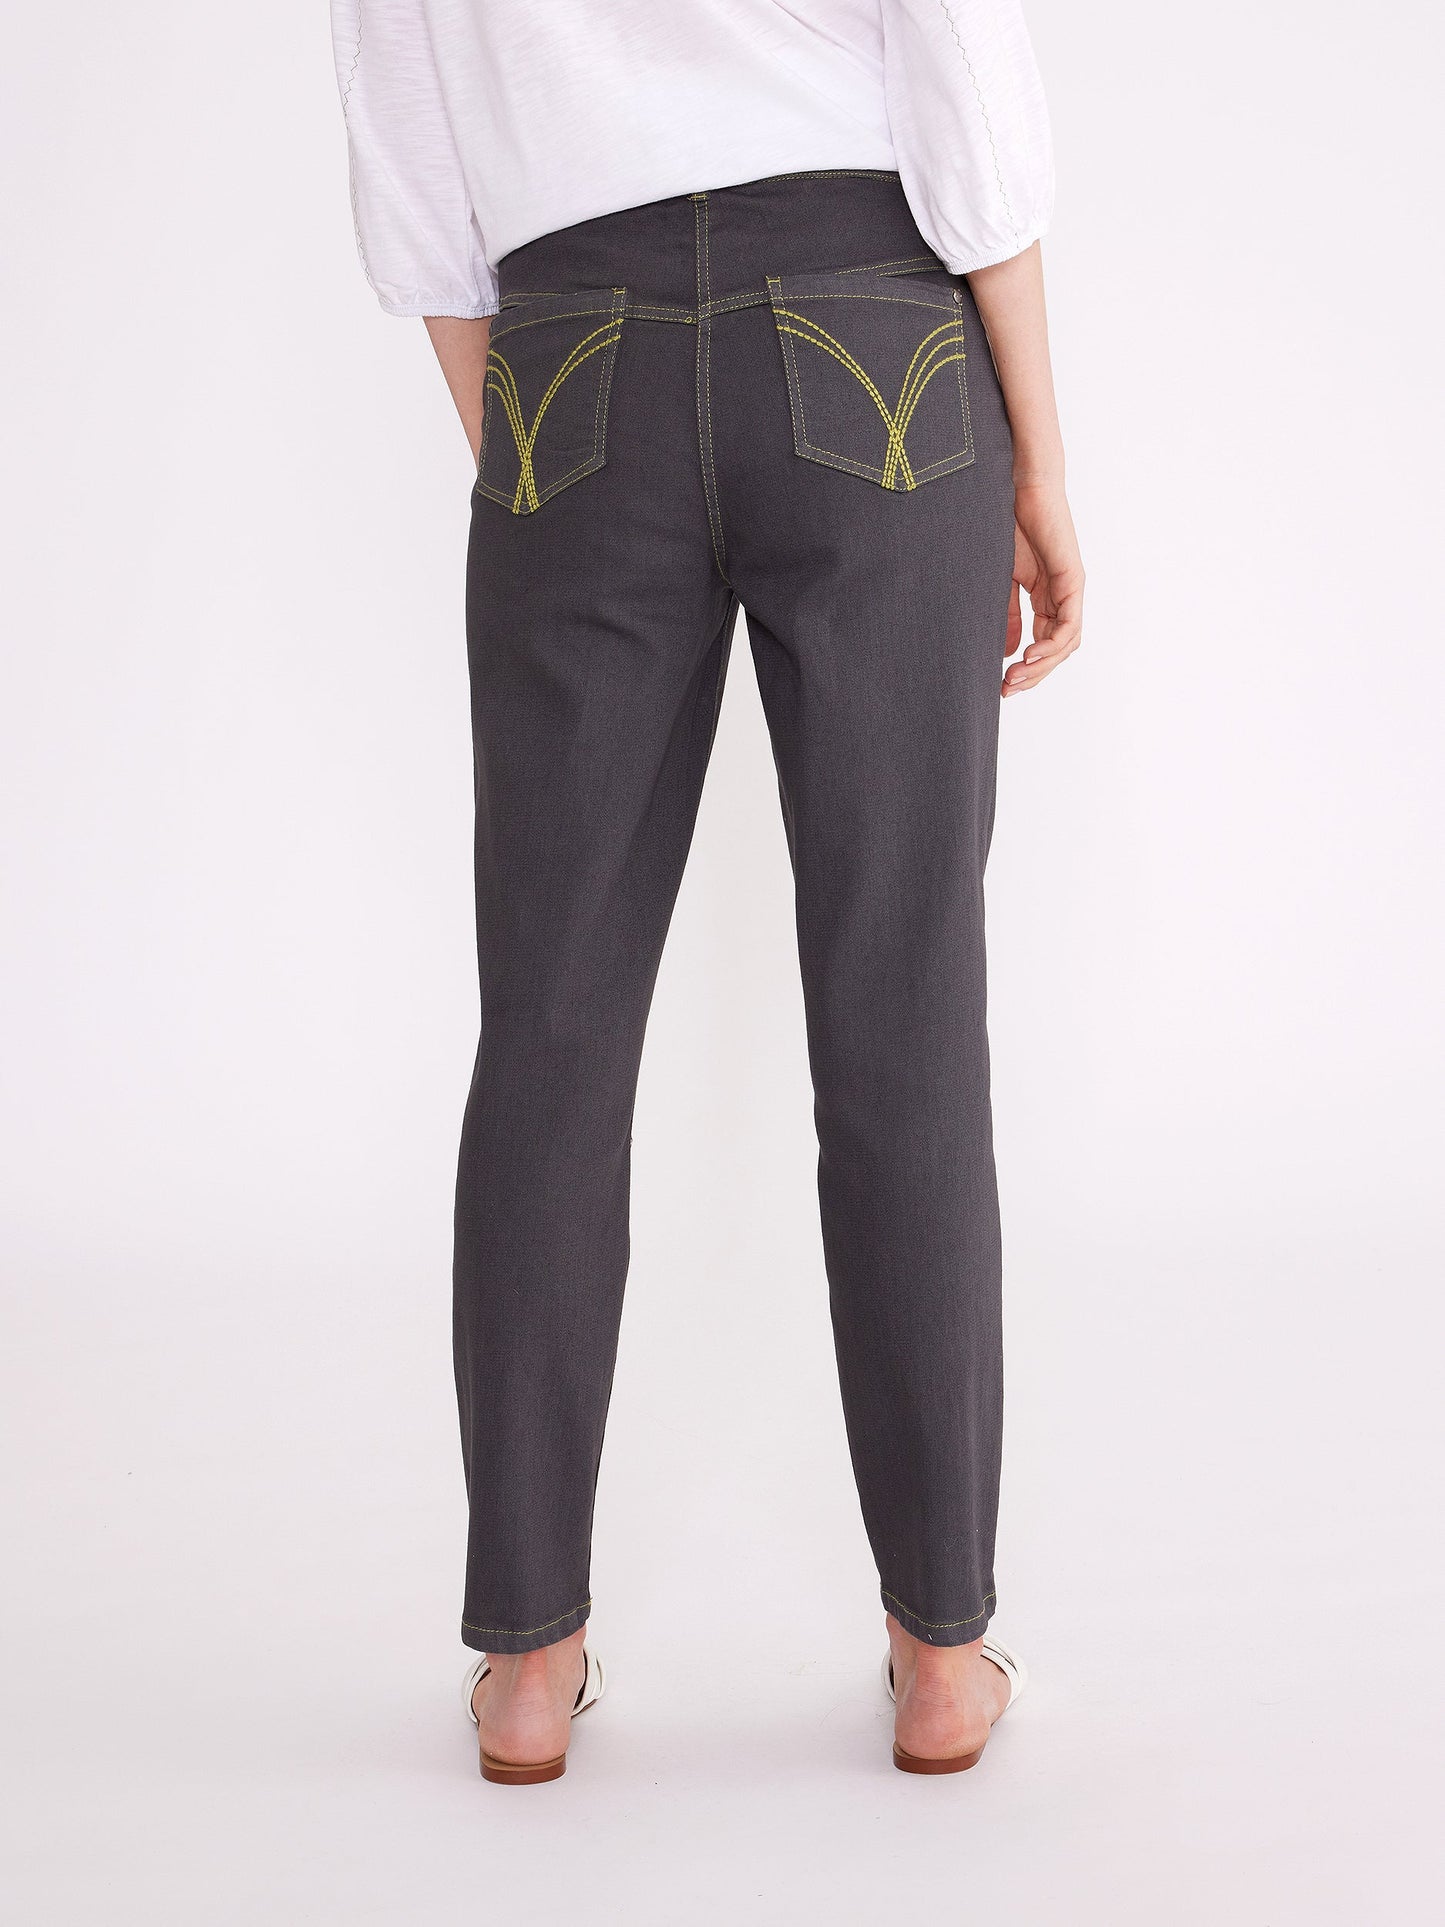 YARRA TRAIL CROPPED CHARCOAL JEAN - CHARCOAL - THE VOGUE STORE